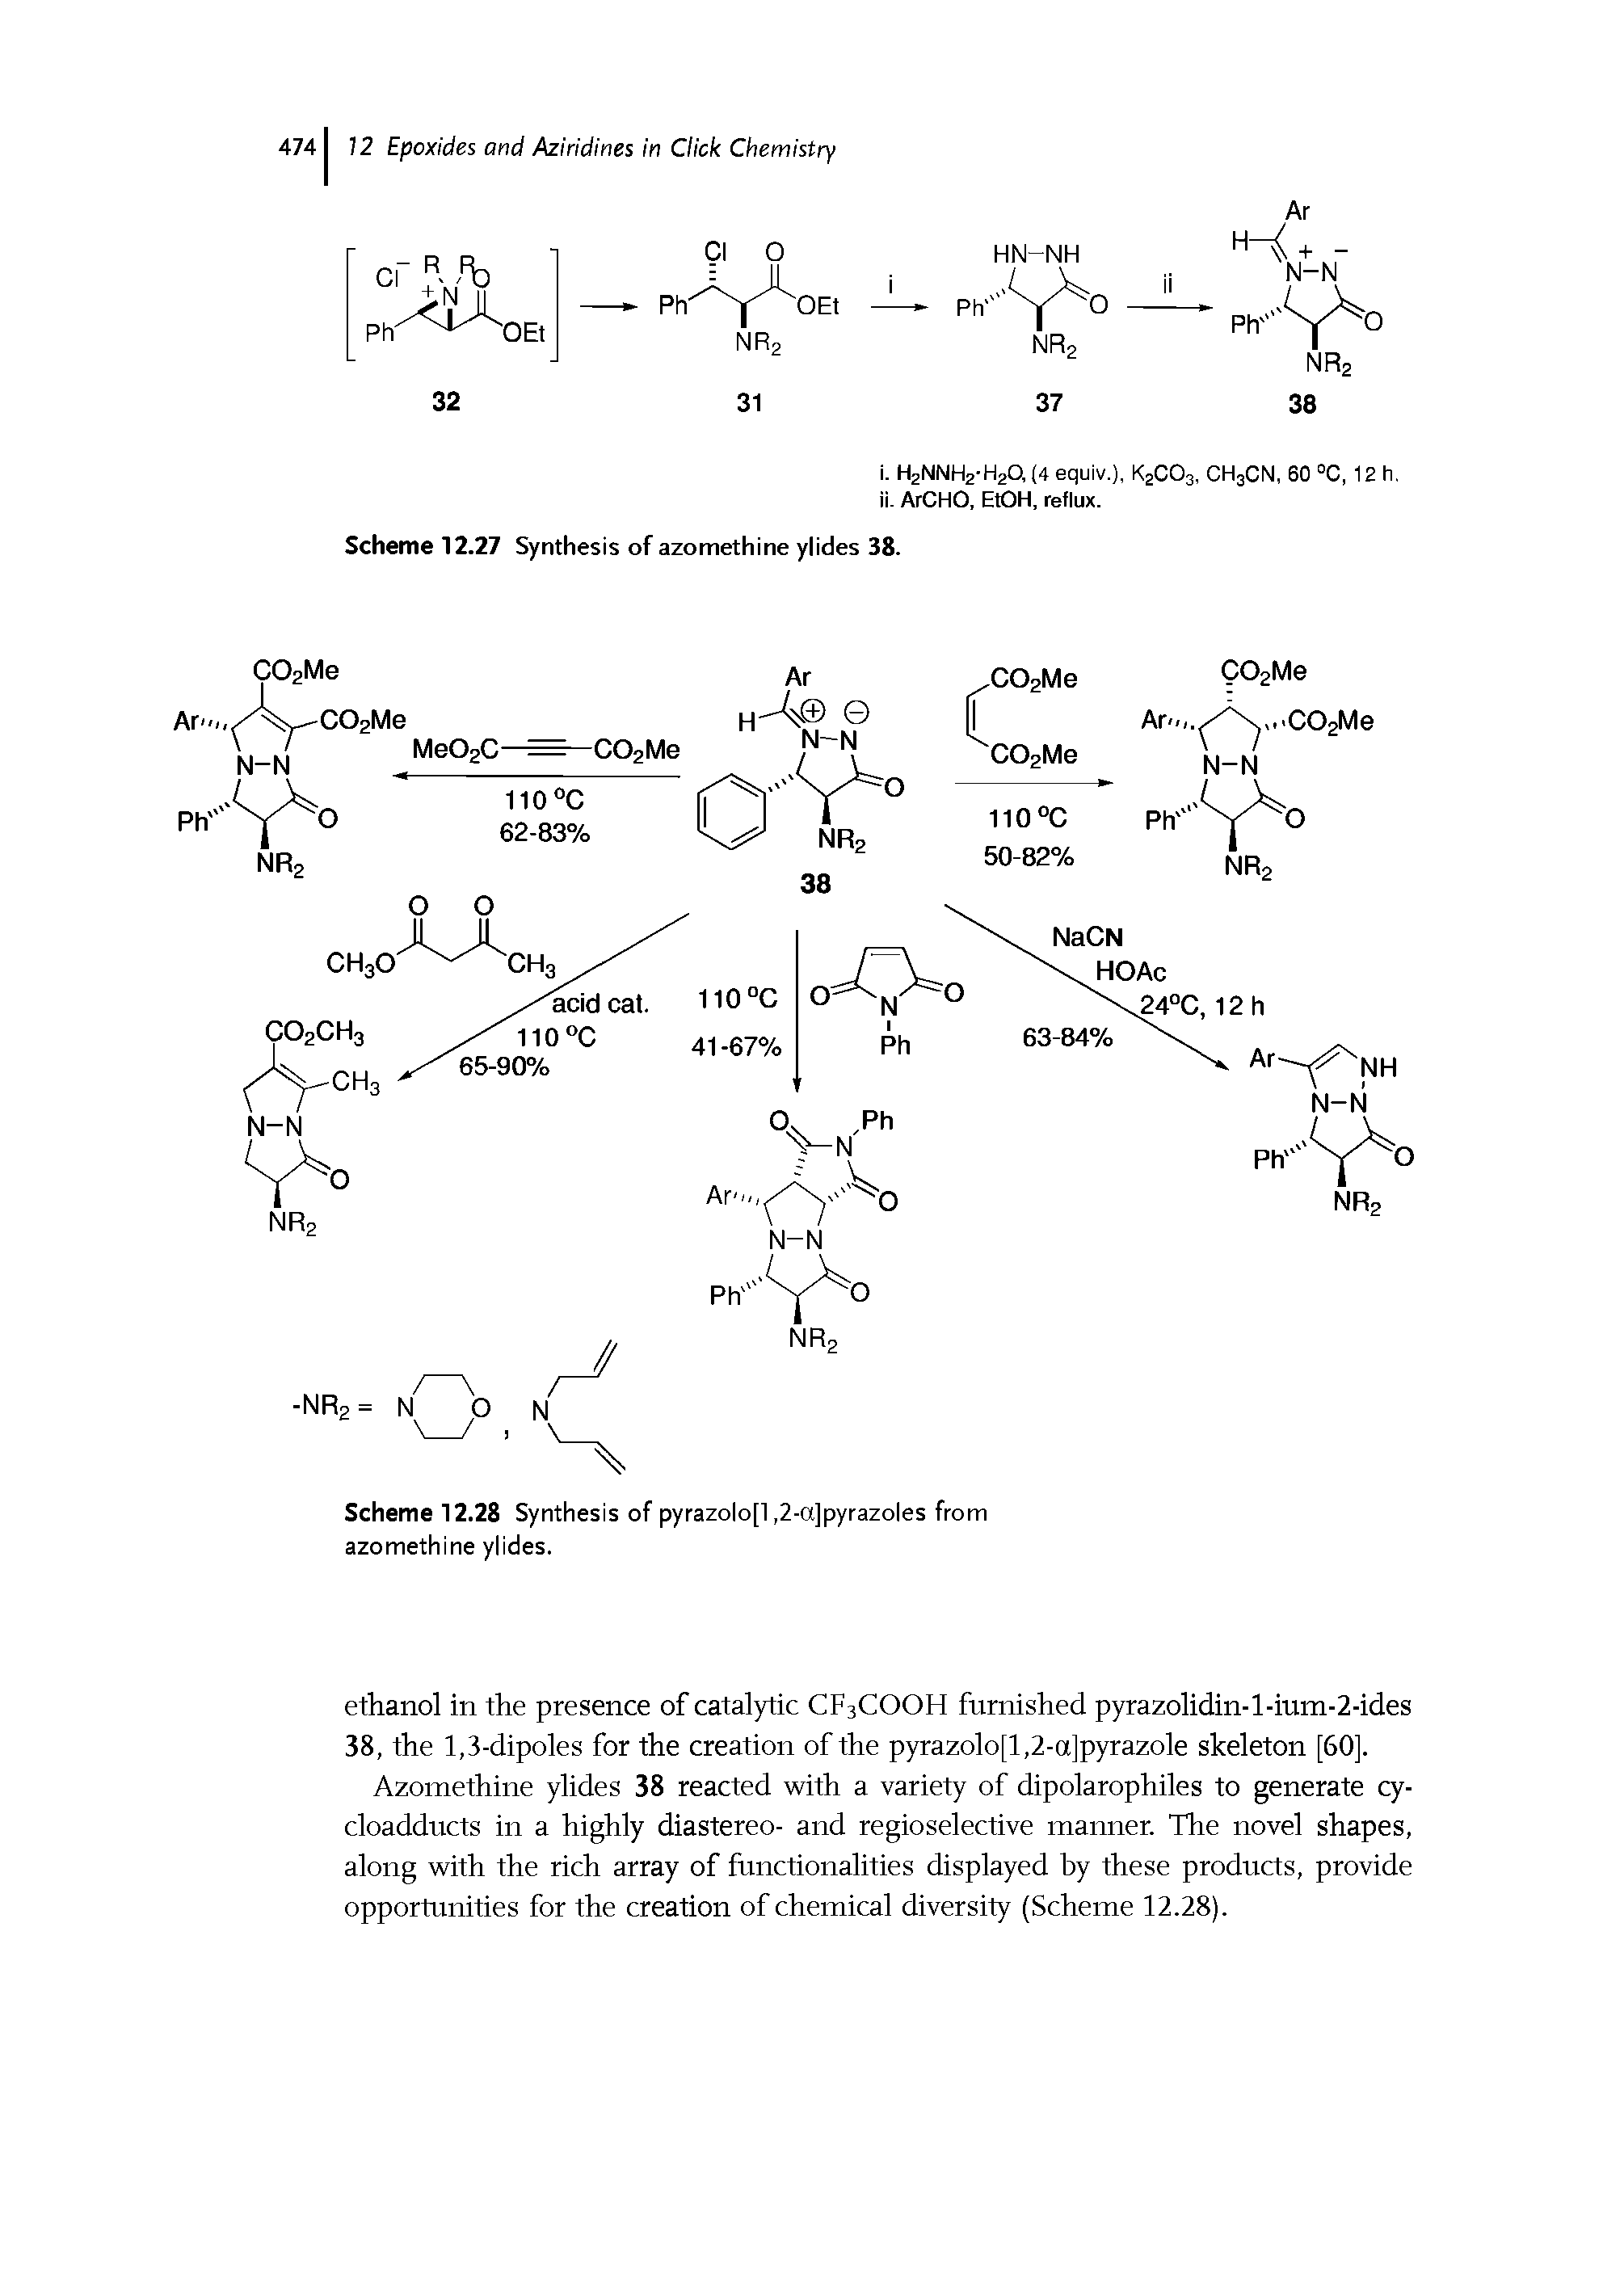 Scheme 12.28 Synthesis of pyrazolo[l, 2-a]pyrazoles from azomethine ylides.